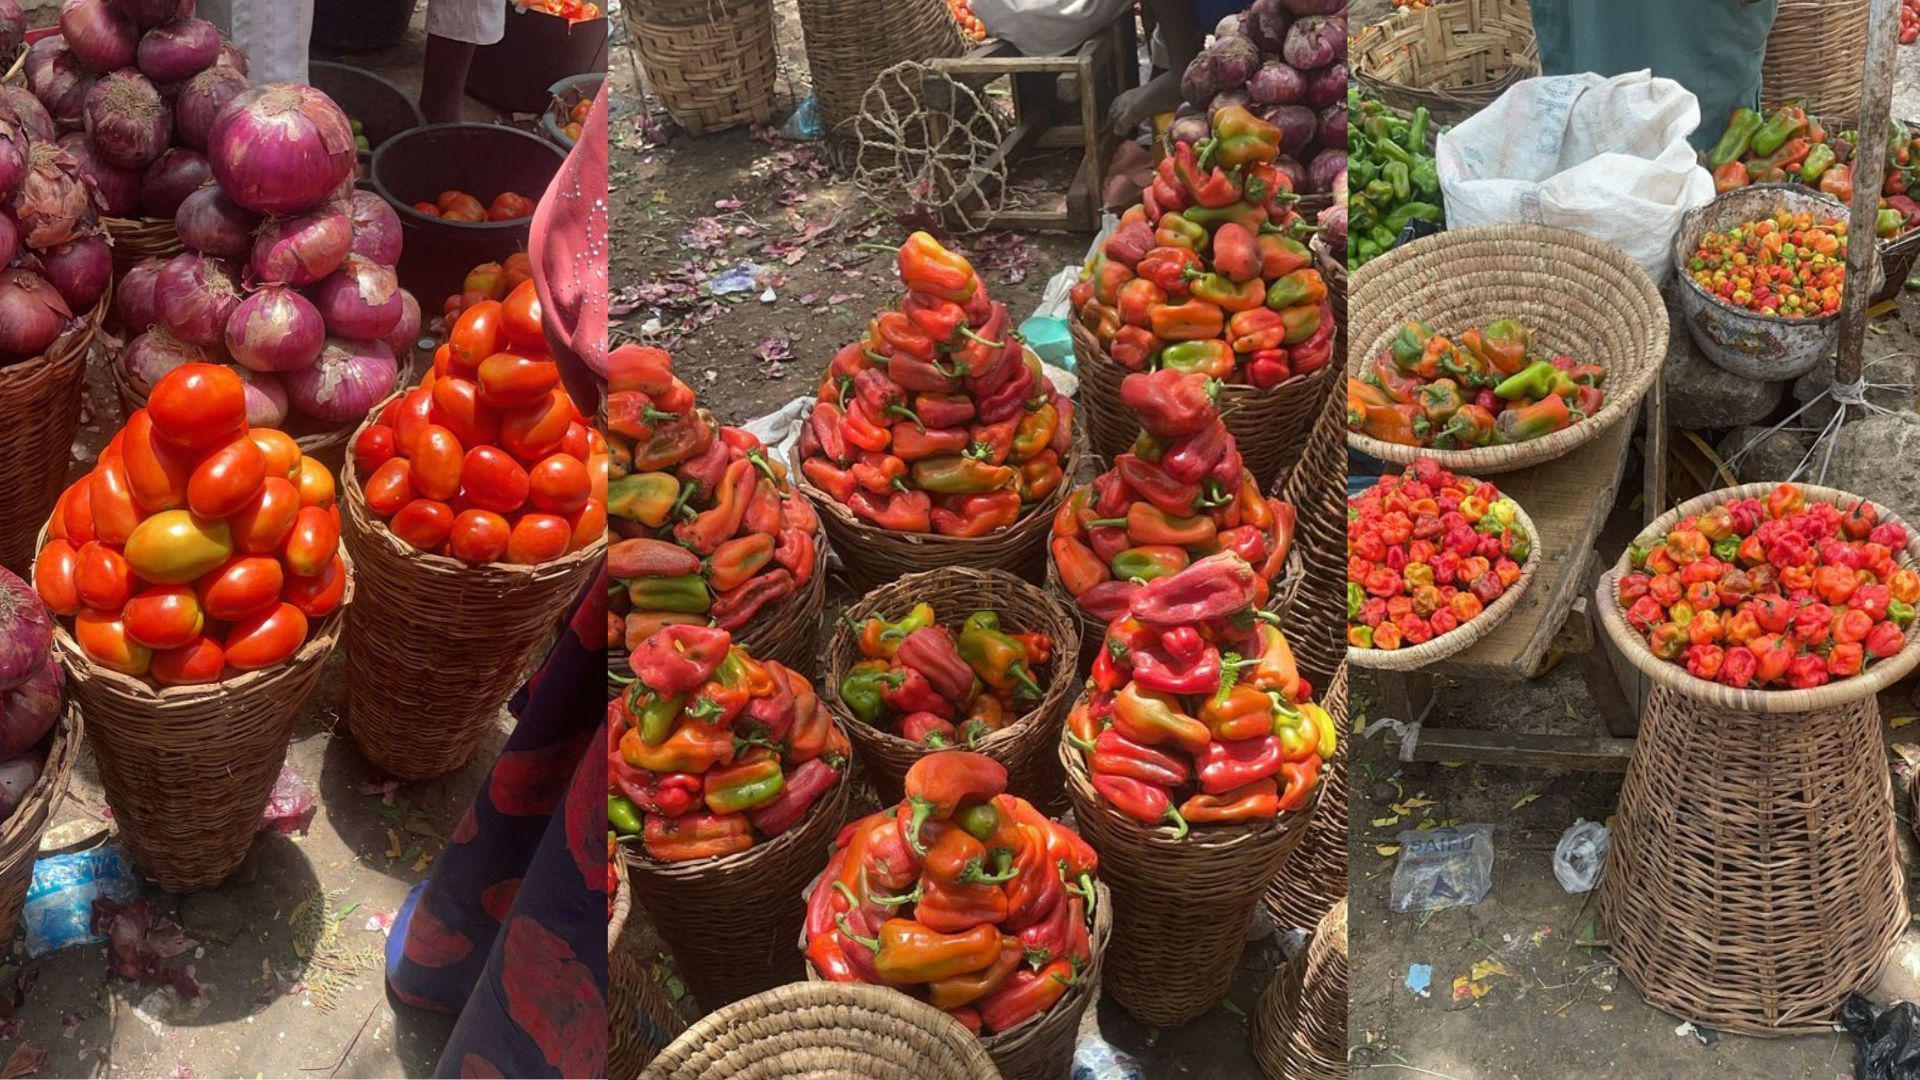 Pepper, Tomato and Tatashe for market don cost